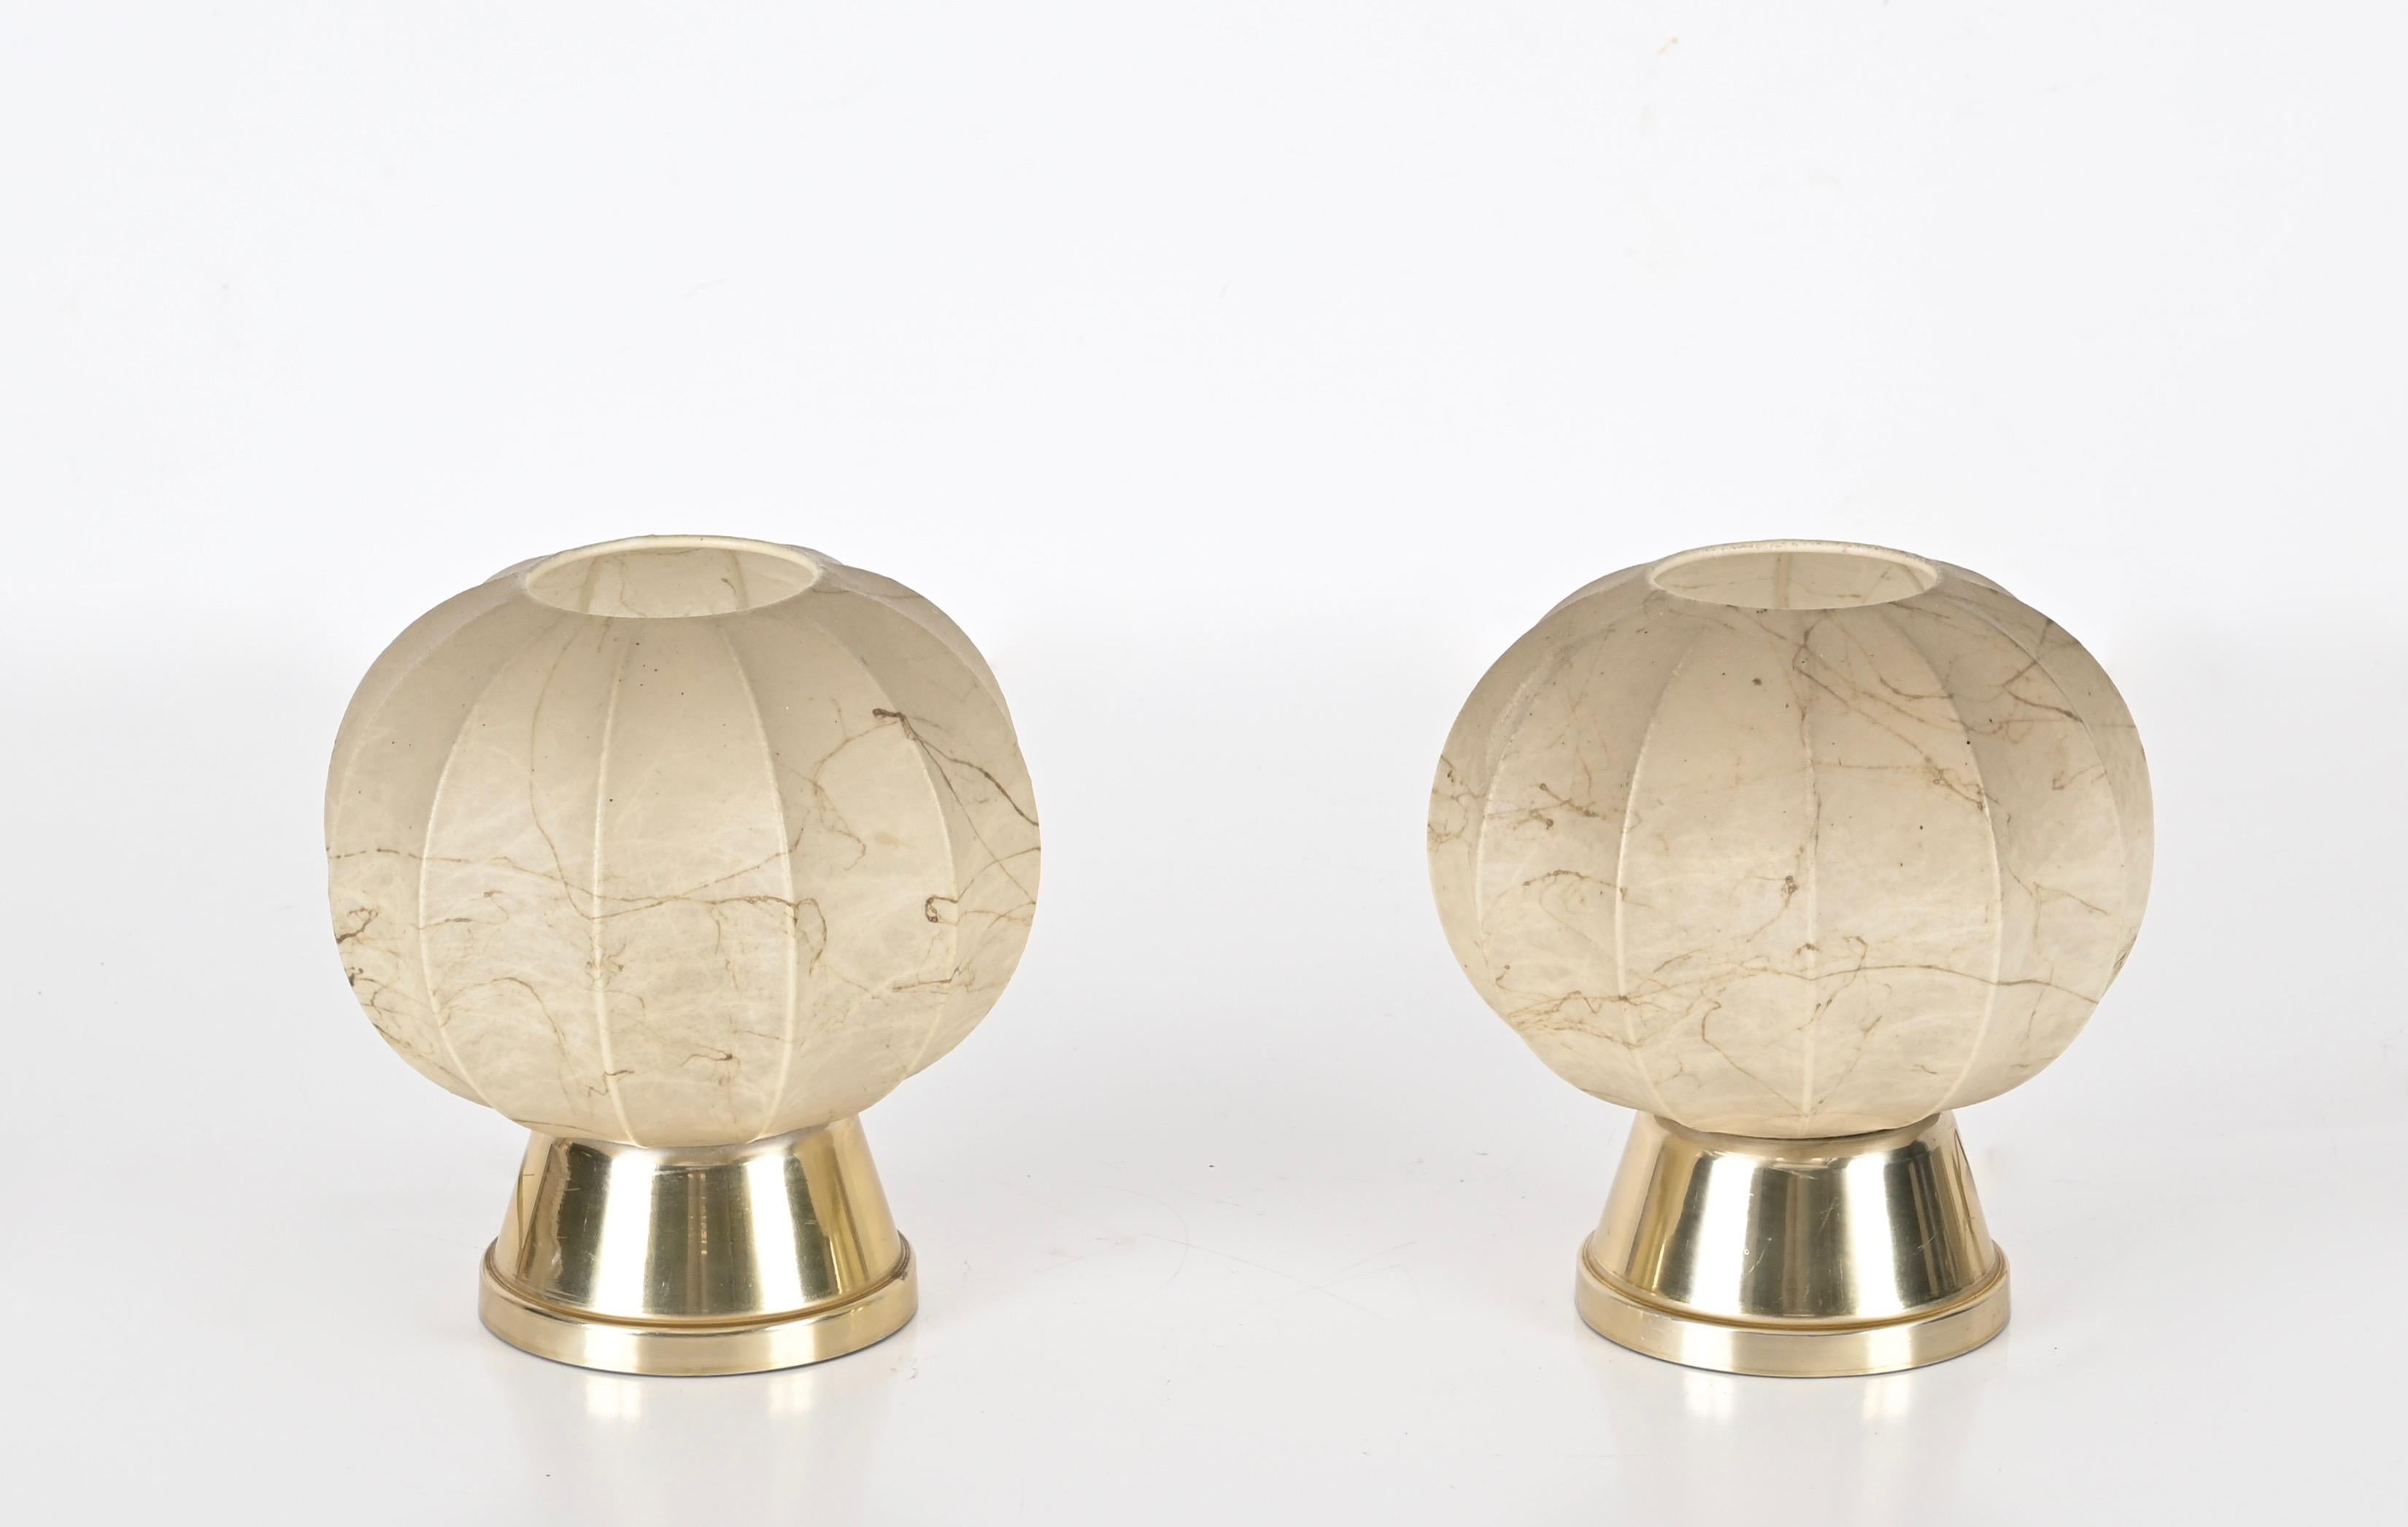 Stunning pair of cocoon table lamps with gilt metal base. These rare table lamps were designed by Achille Castiglioni in Italy during the 1960s.

This gorgeous pair of table lamps feature a gold metal base with a beige 